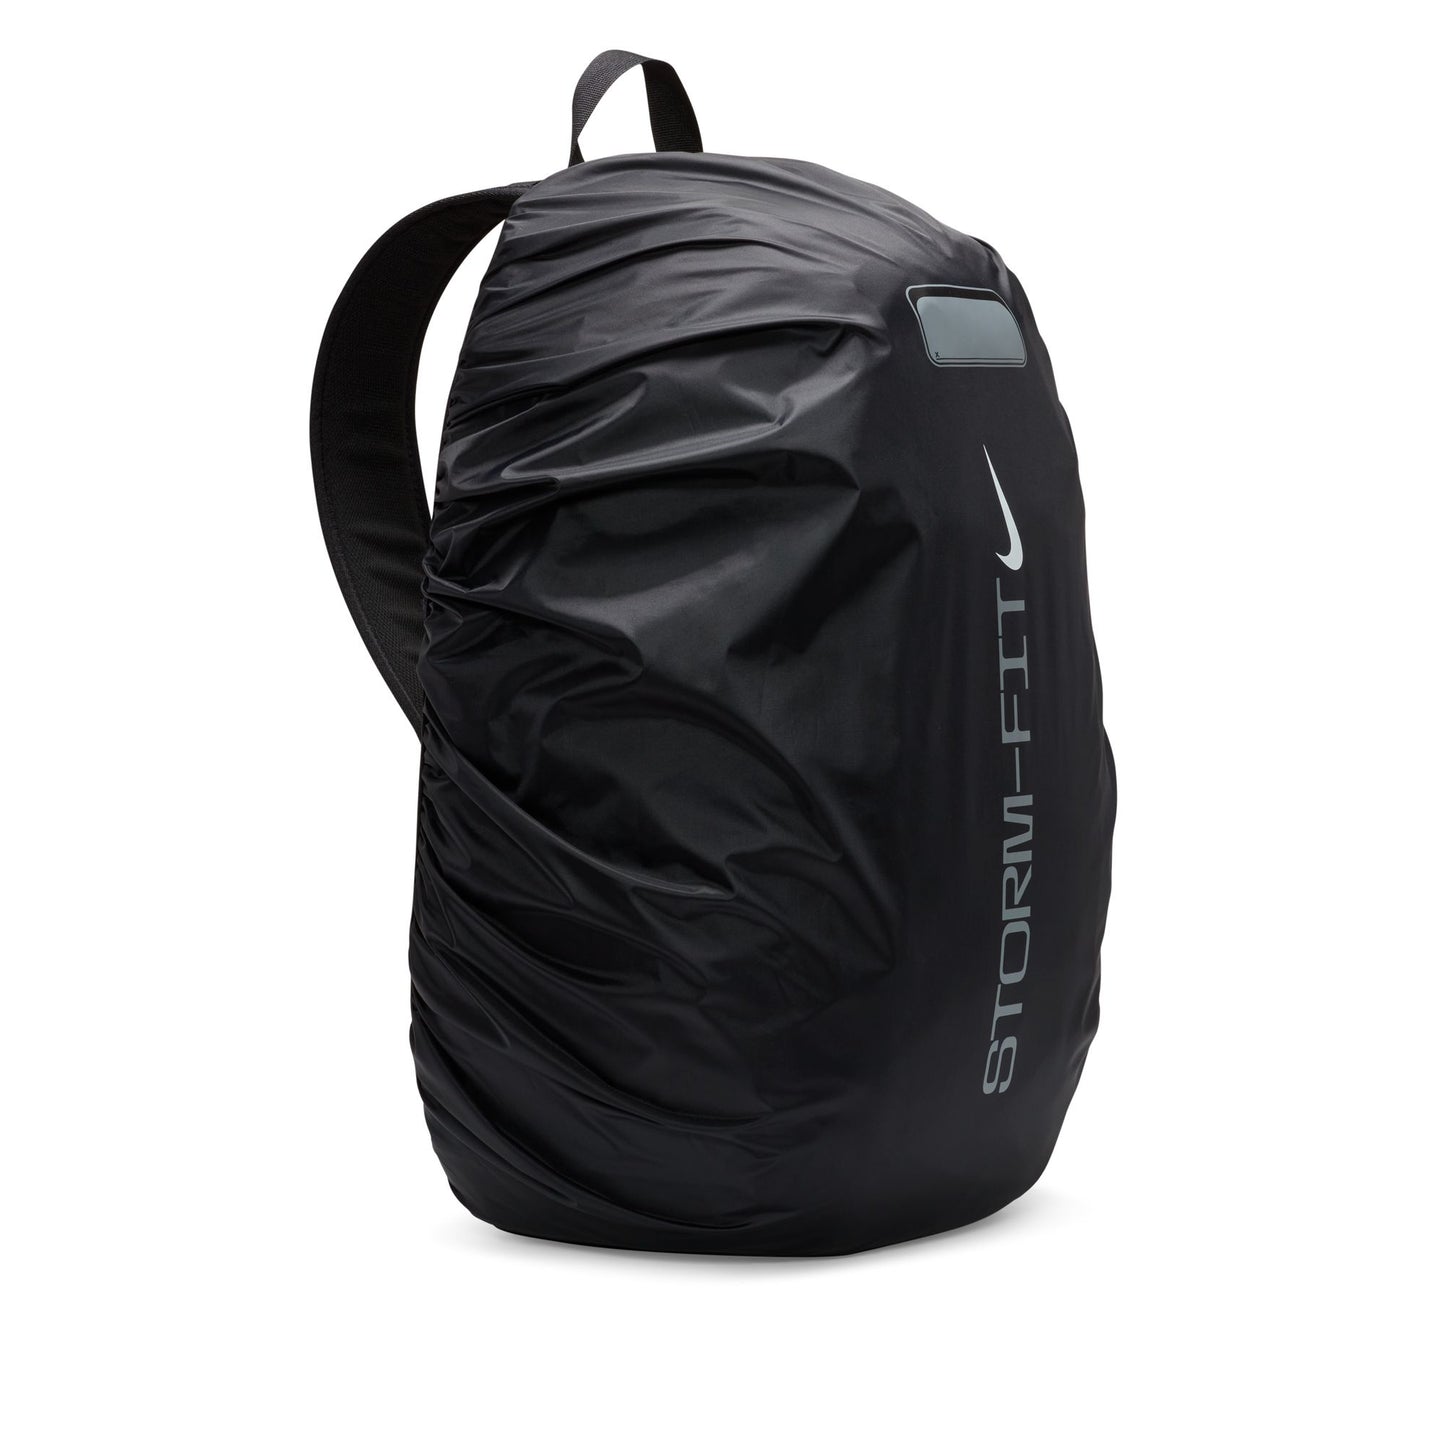 NAPIER SOUTH FC TEAM BACKPACK